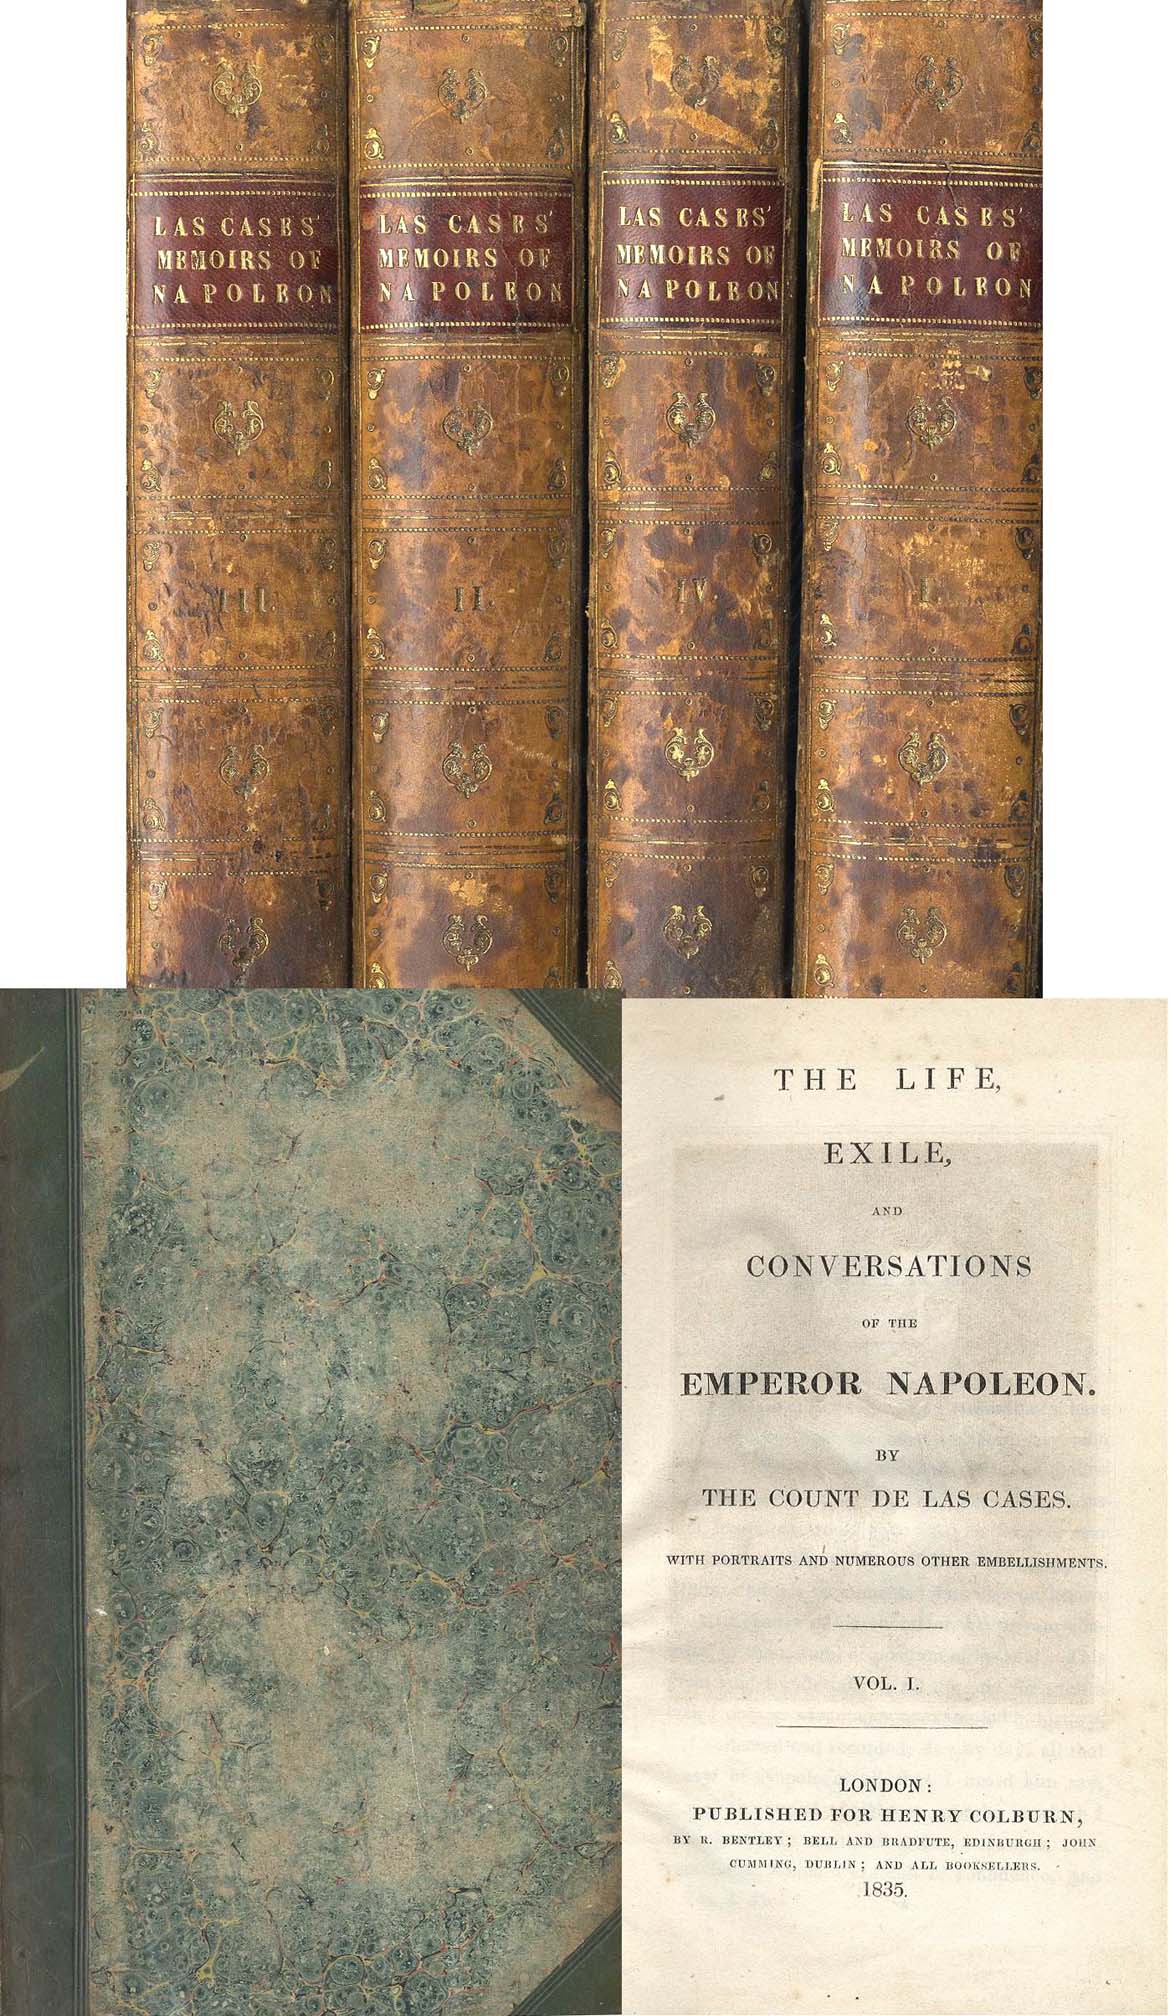 ''The Life, Exile and Conversations of the Emperor Napoleon'' by Count de las Cases. Published by